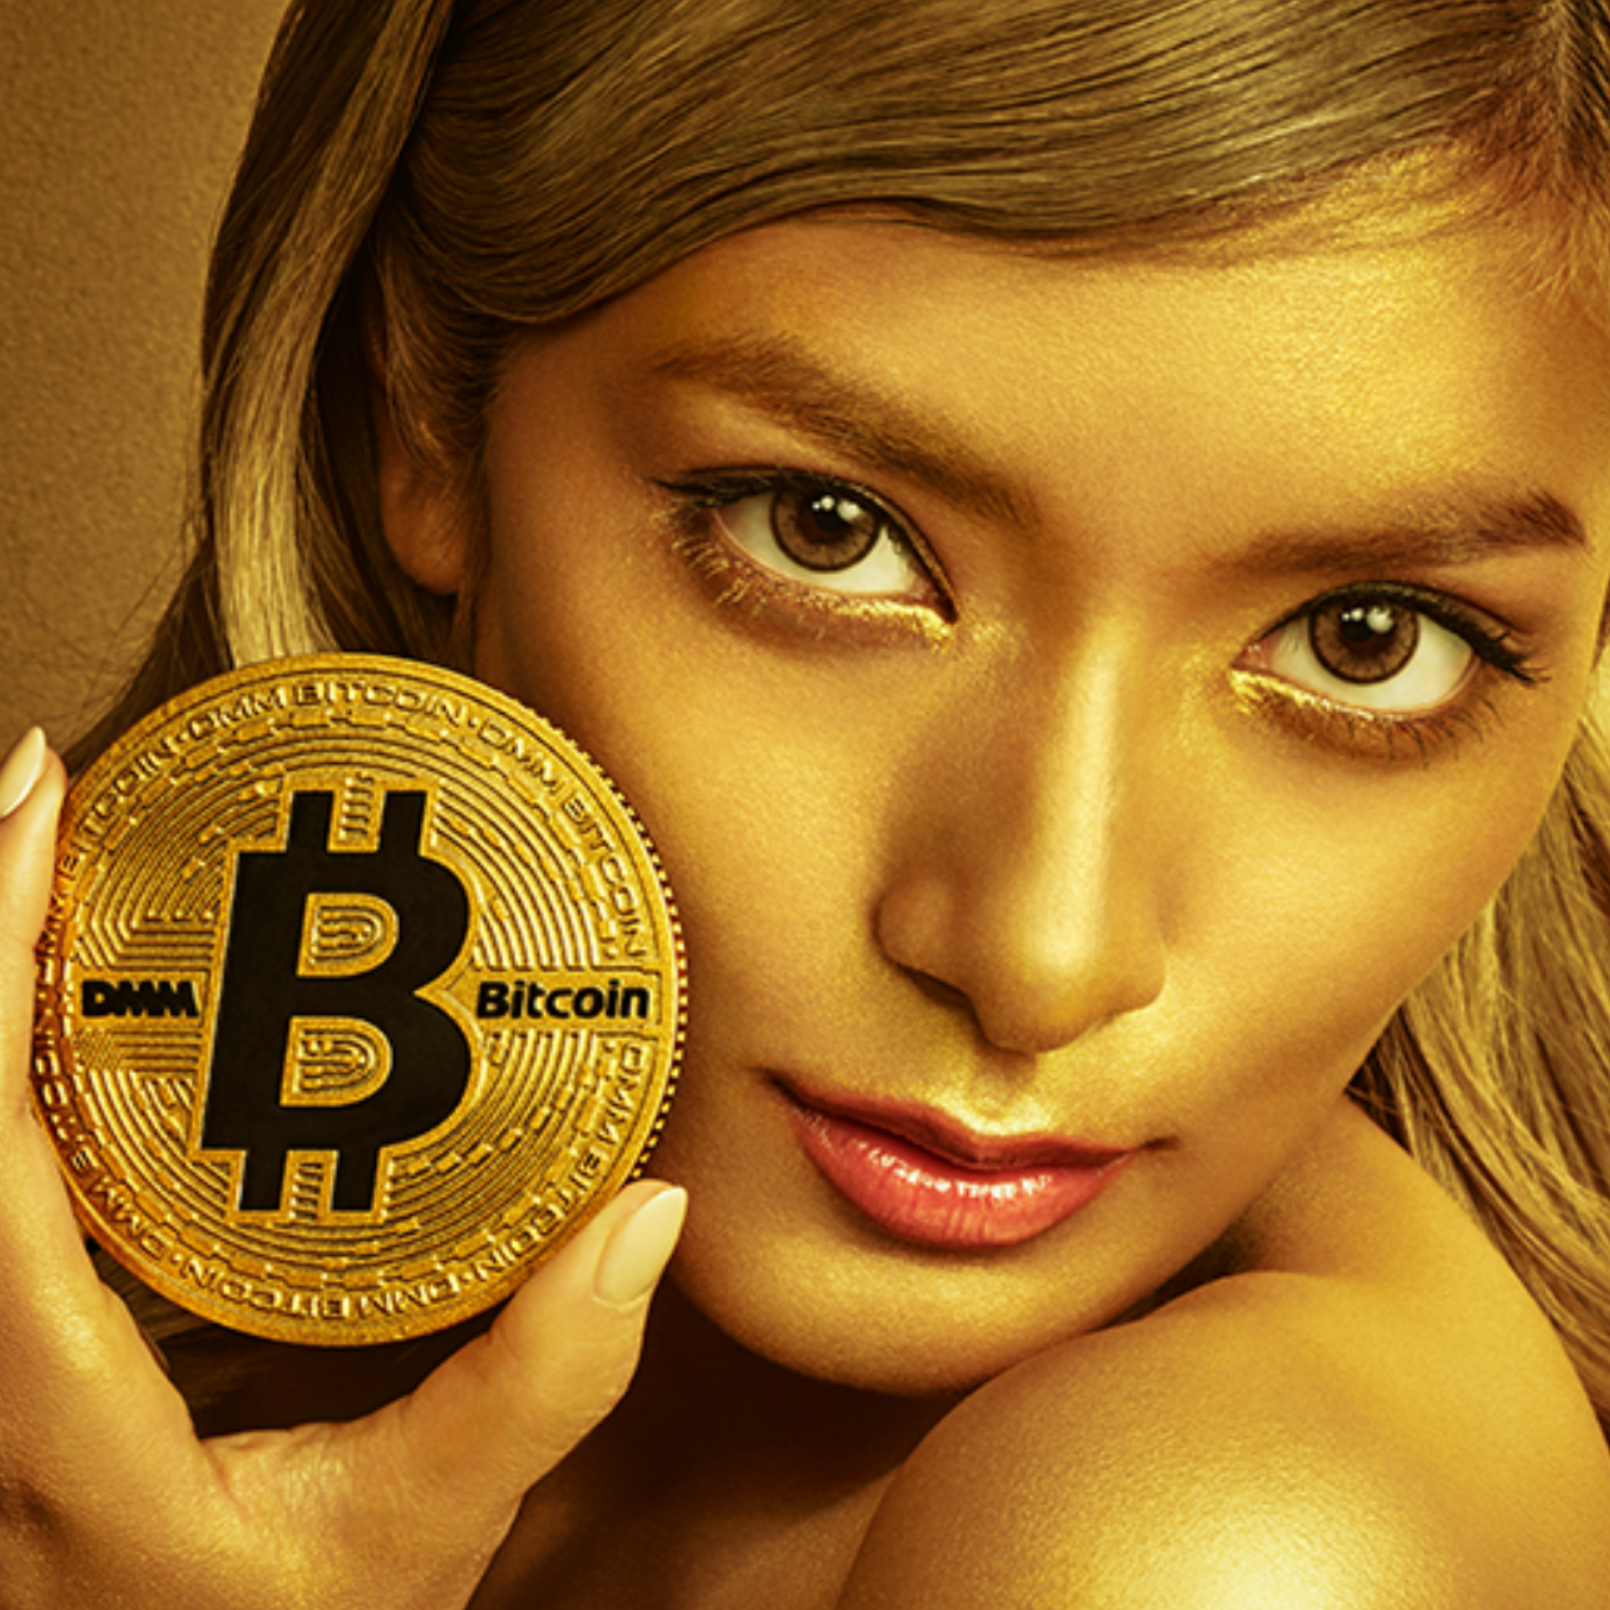 Japan's DMM Bitcoin Exchange Opens for Business With 7 Cryptocurrencies